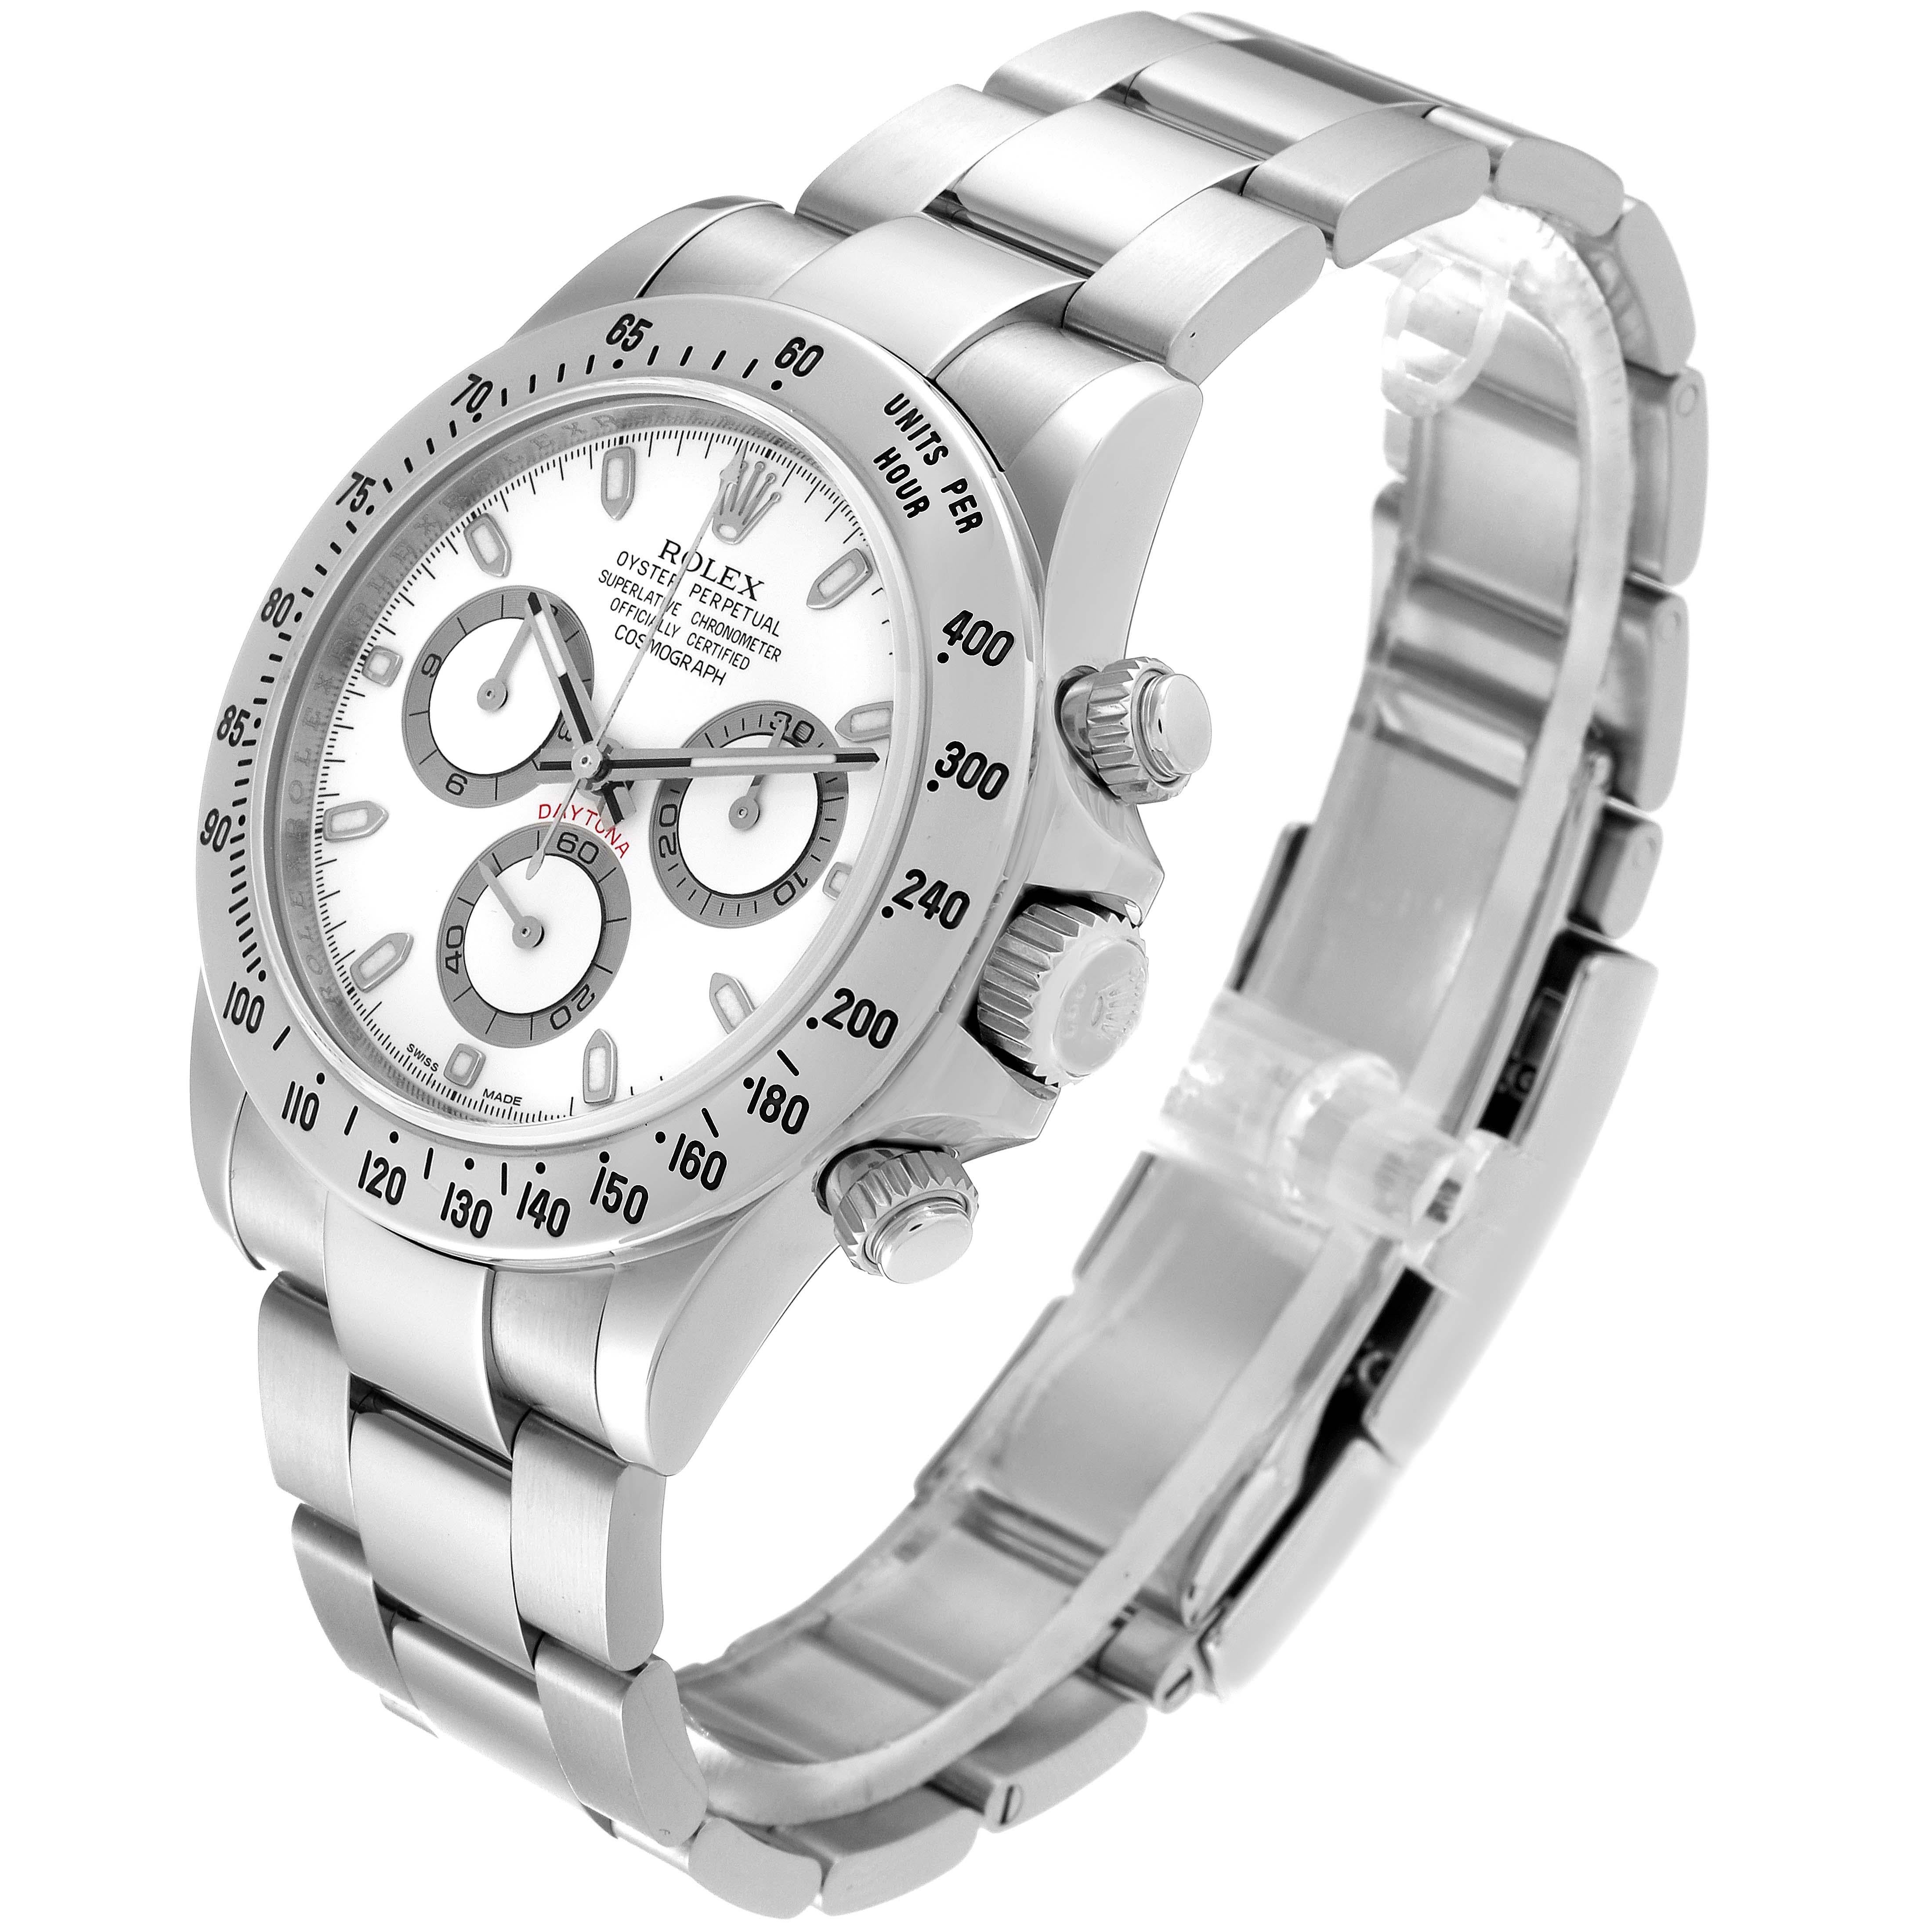 Rolex Daytona White Dial Chronograph Steel Mens Watch 116520 For Sale 6